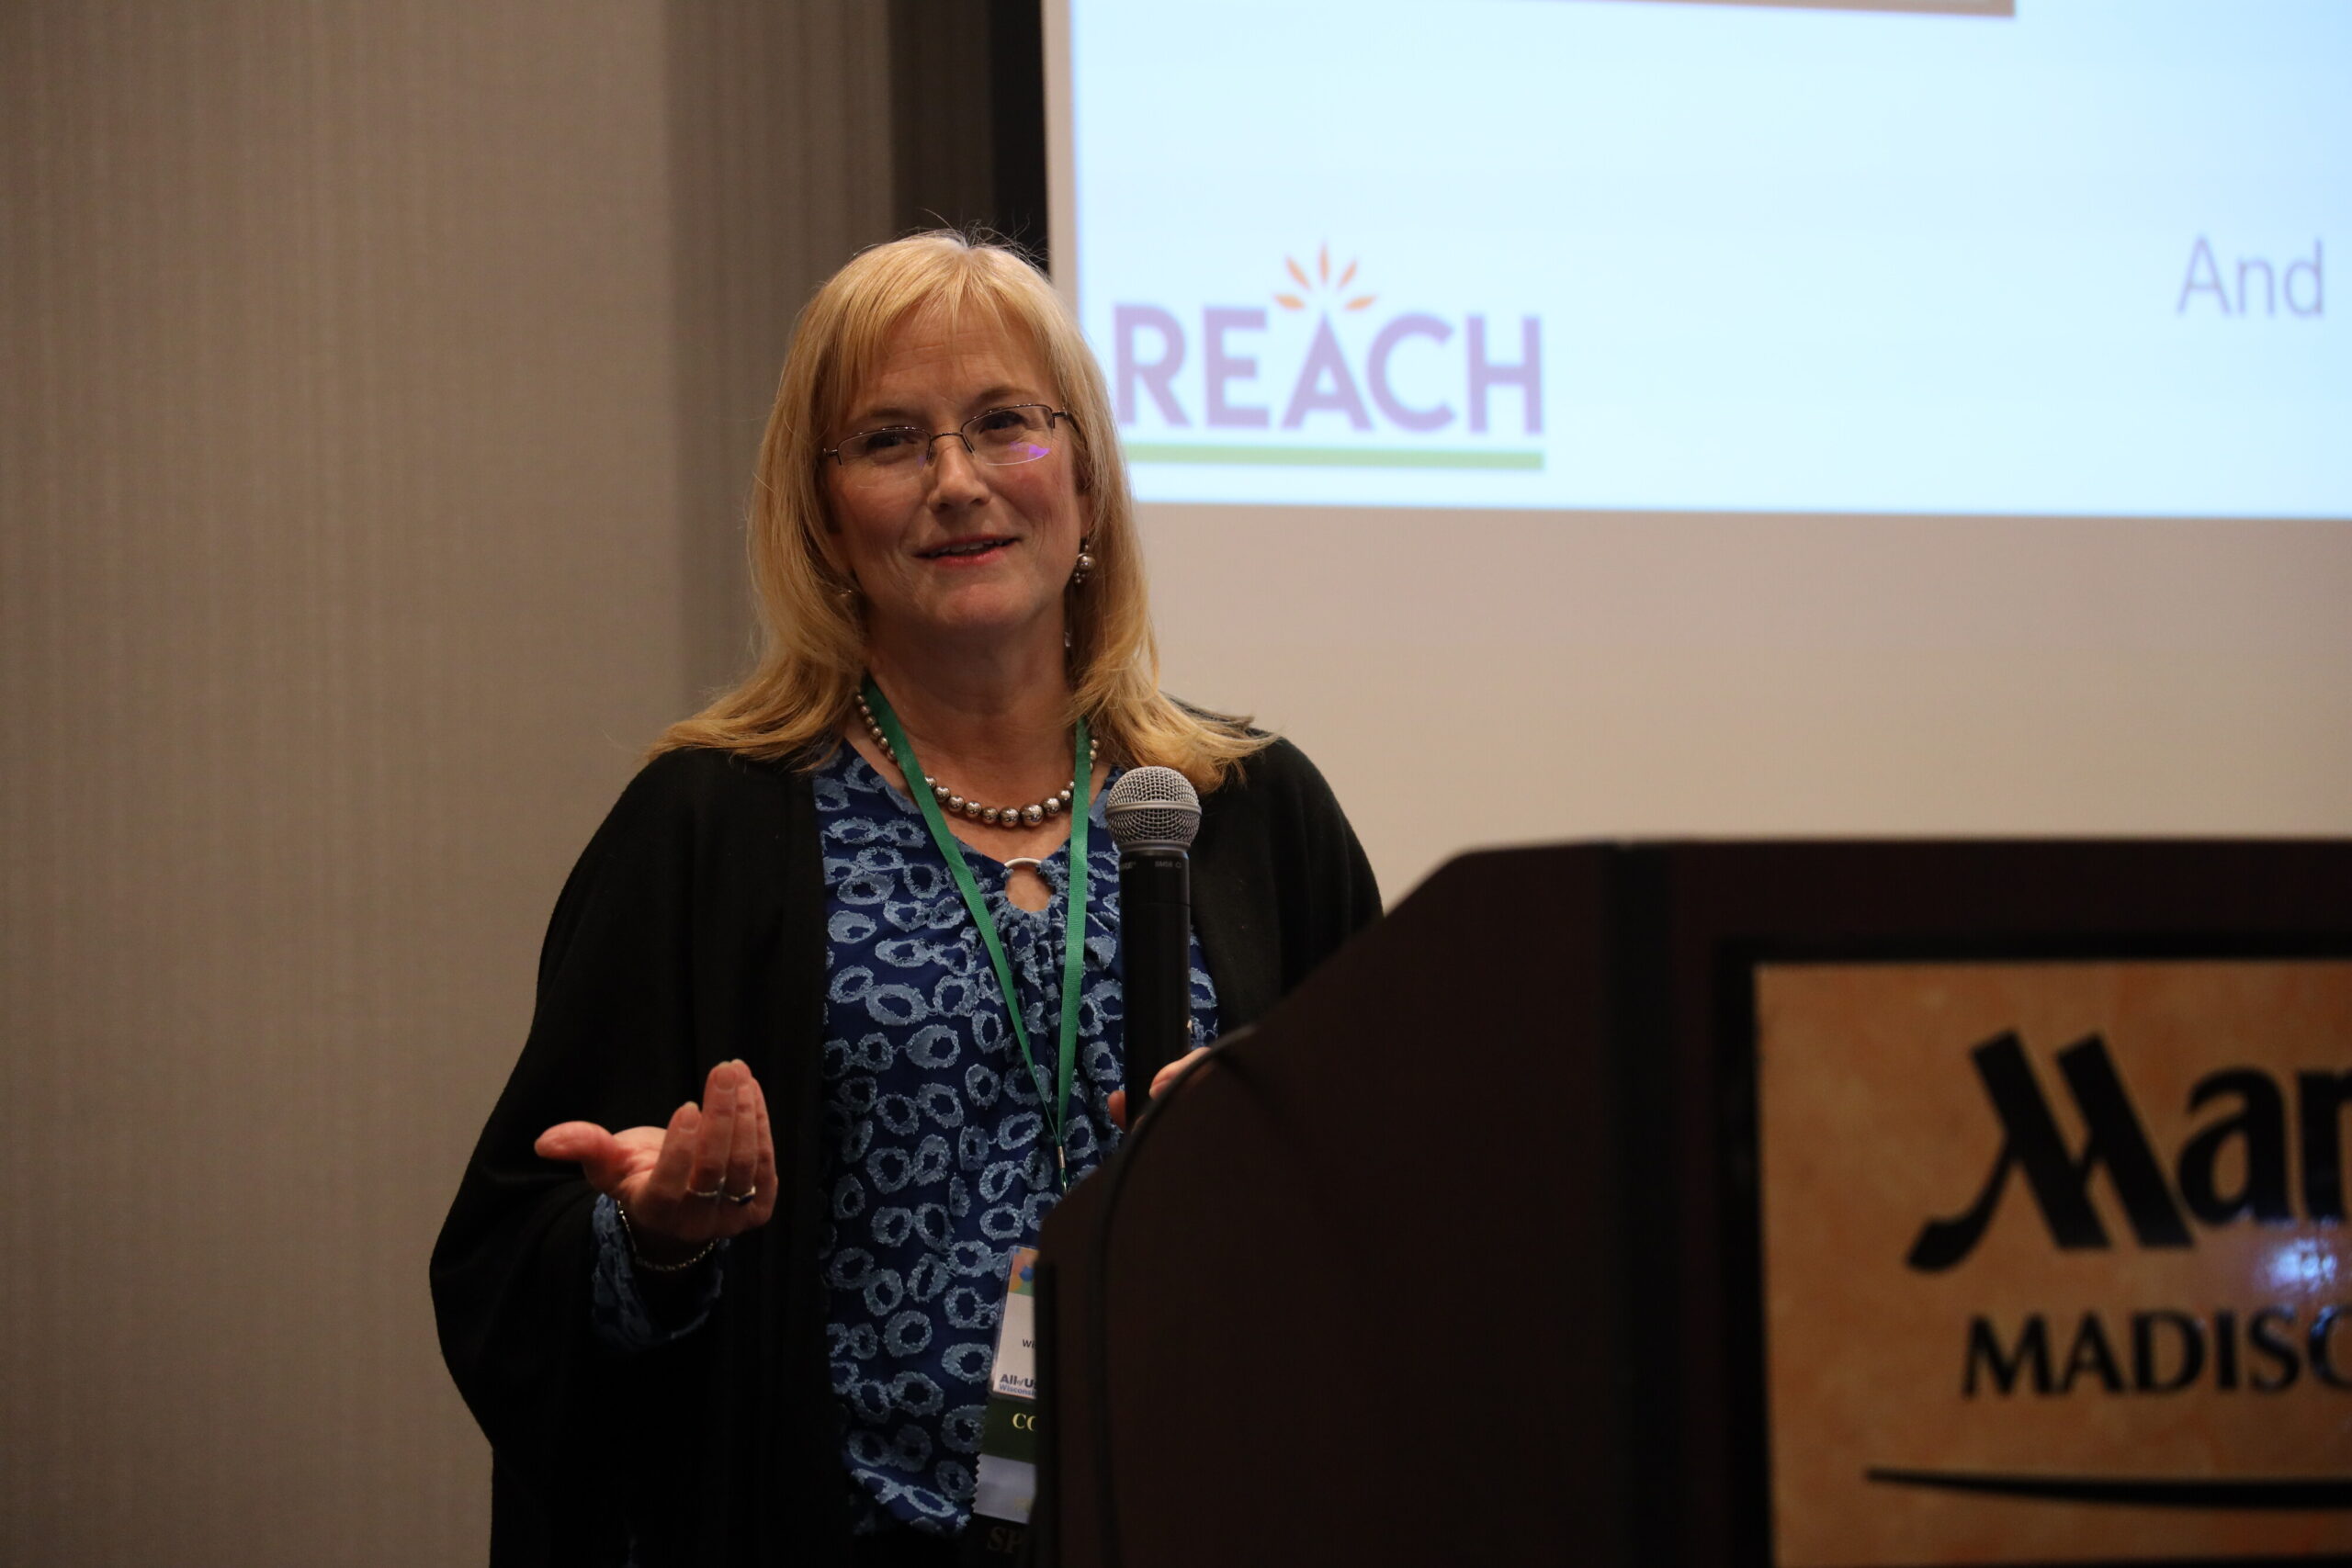 Maureen Busalacchi, director of the Wisconsin Alcohol Policy Project, gives a presentation at the Wisconsin Public Health Association conference